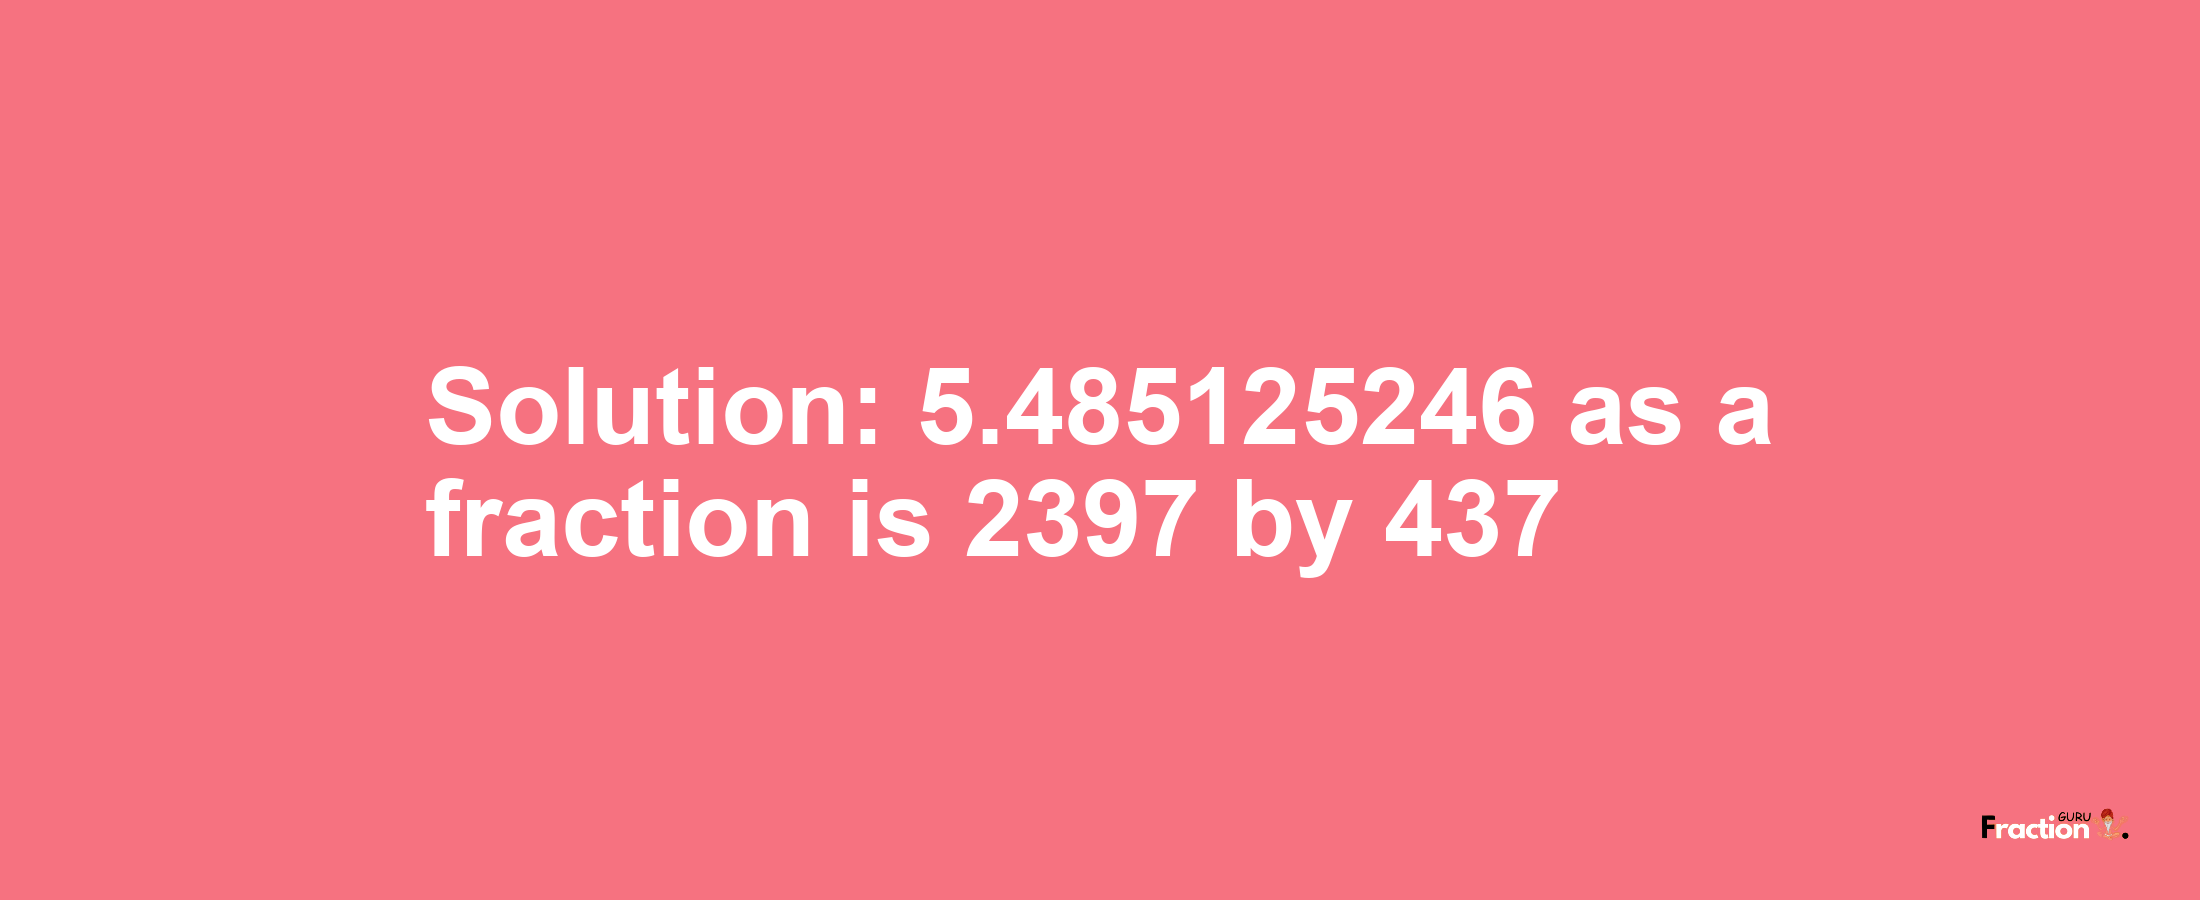 Solution:5.485125246 as a fraction is 2397/437